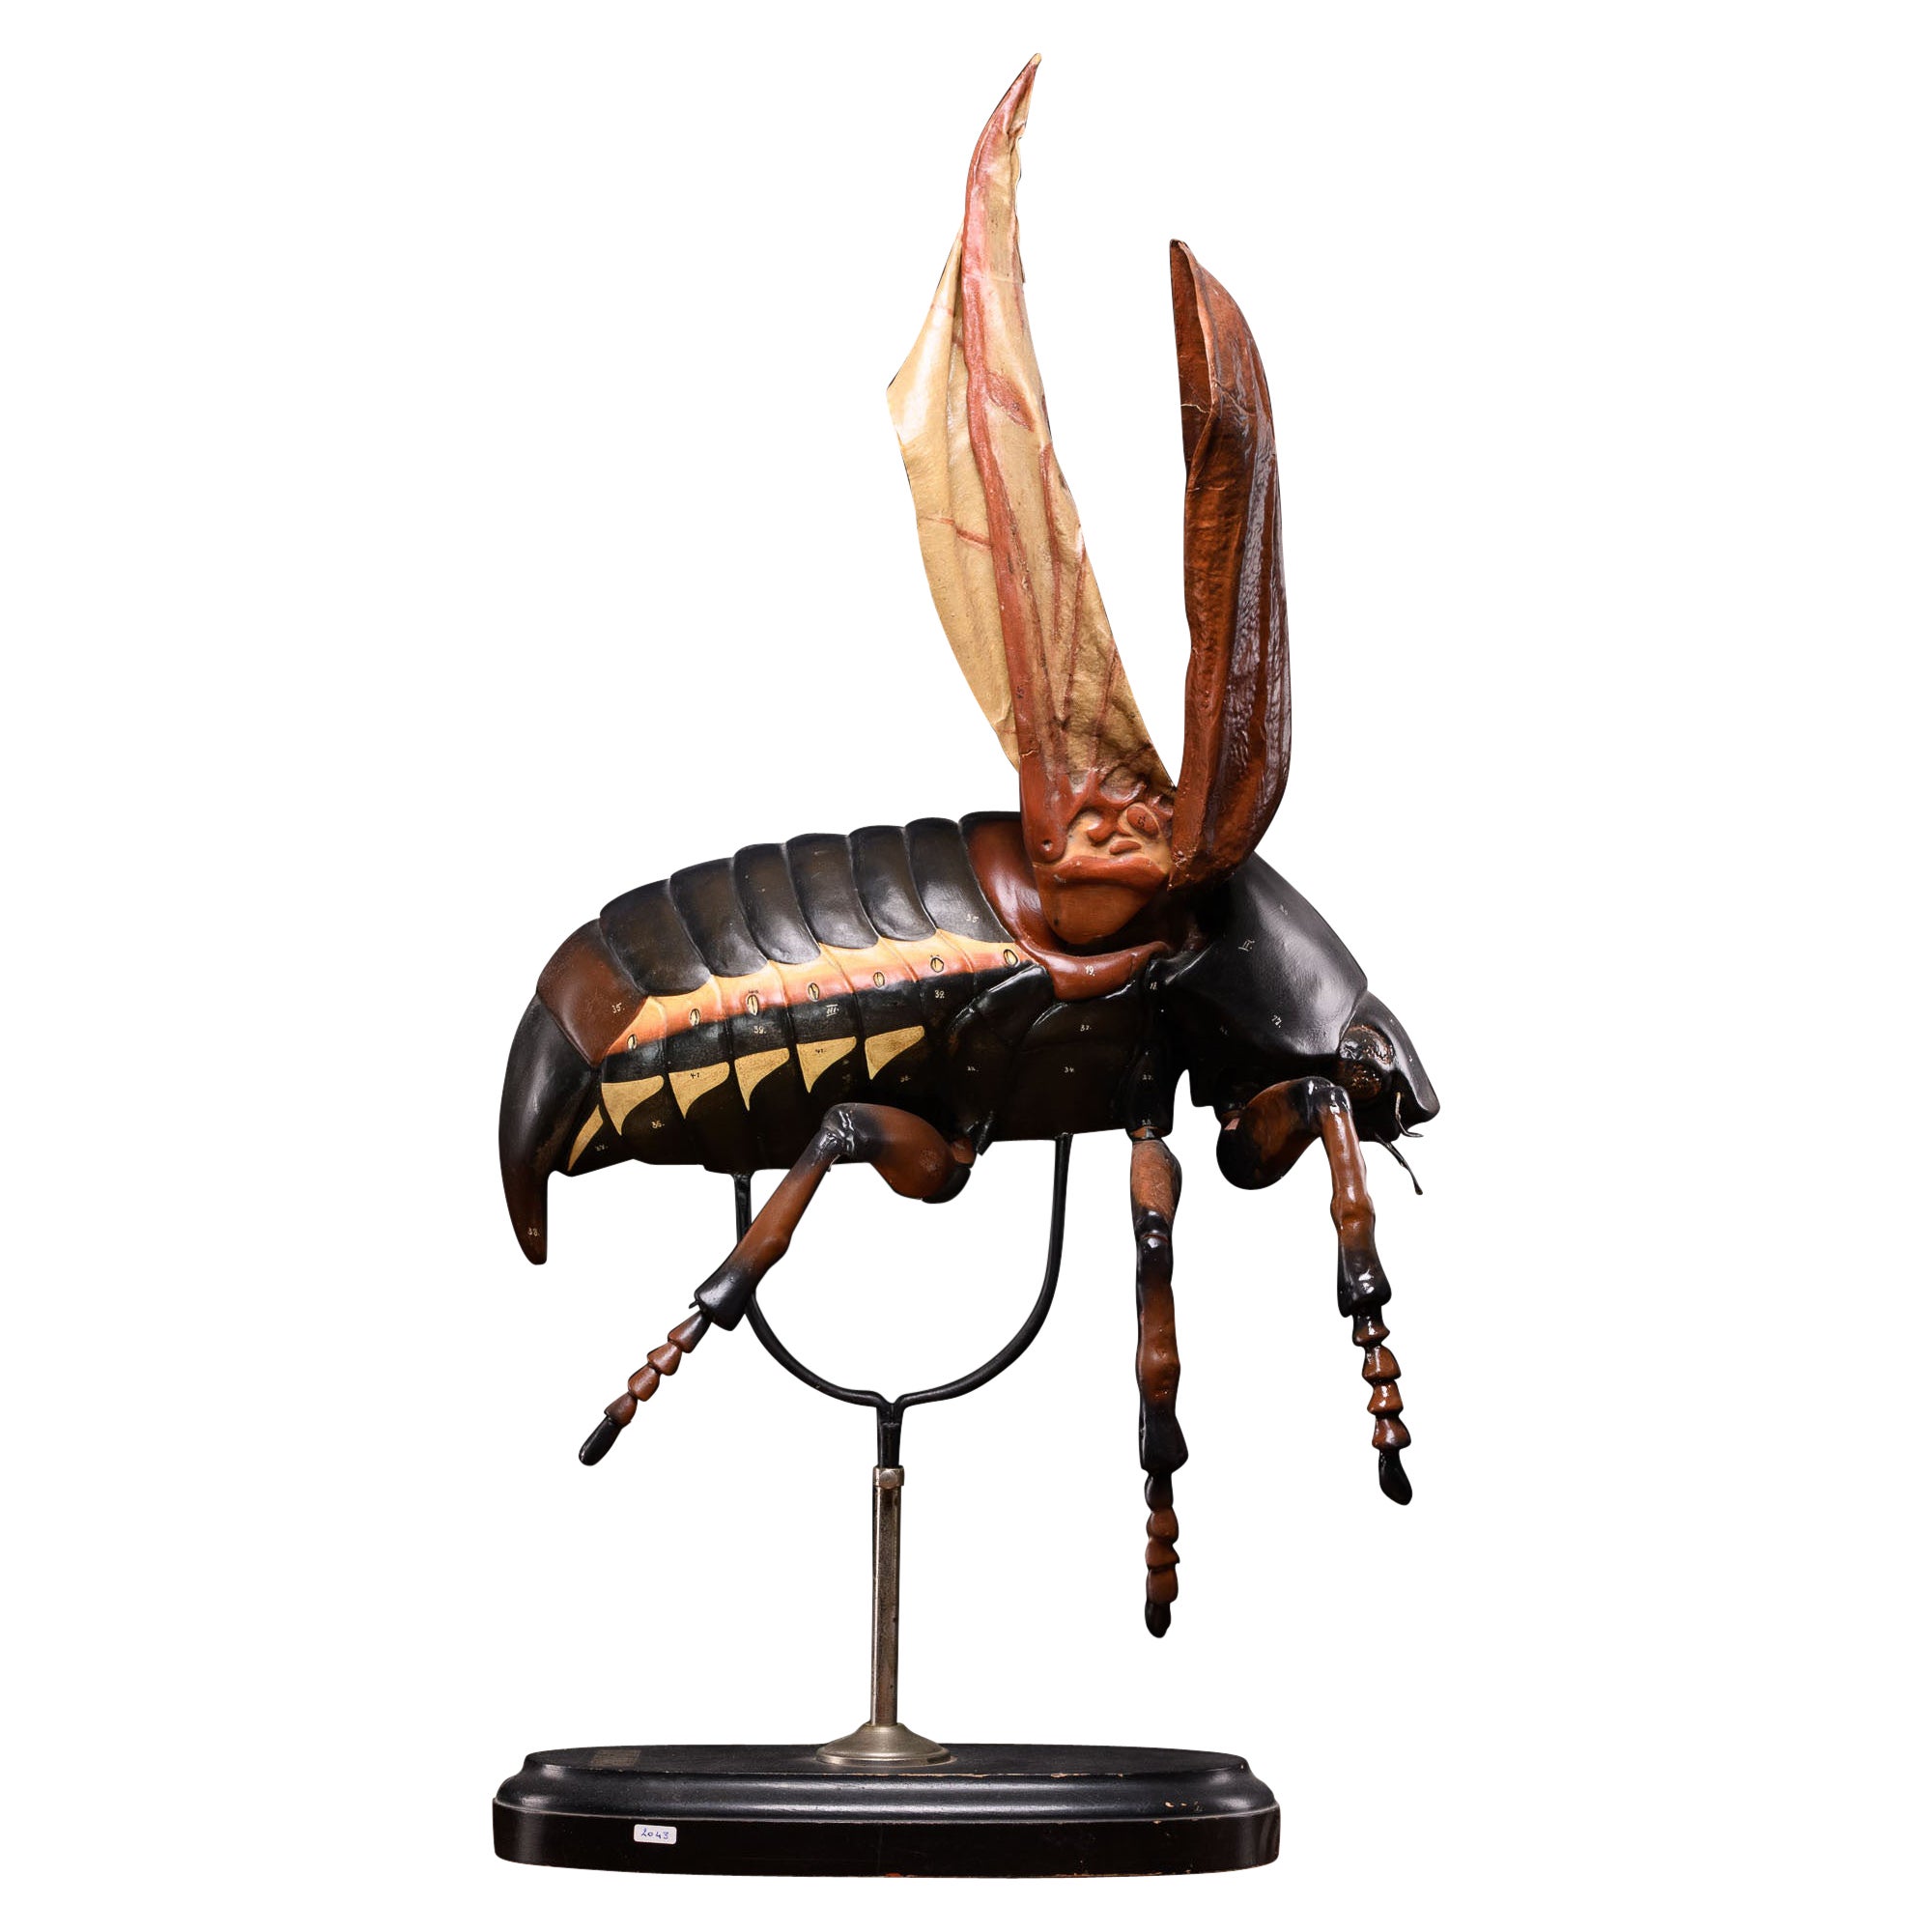 Didactical Model of Cockchafer or May bug sold by the “ Denoyer-Geppert Company For Sale